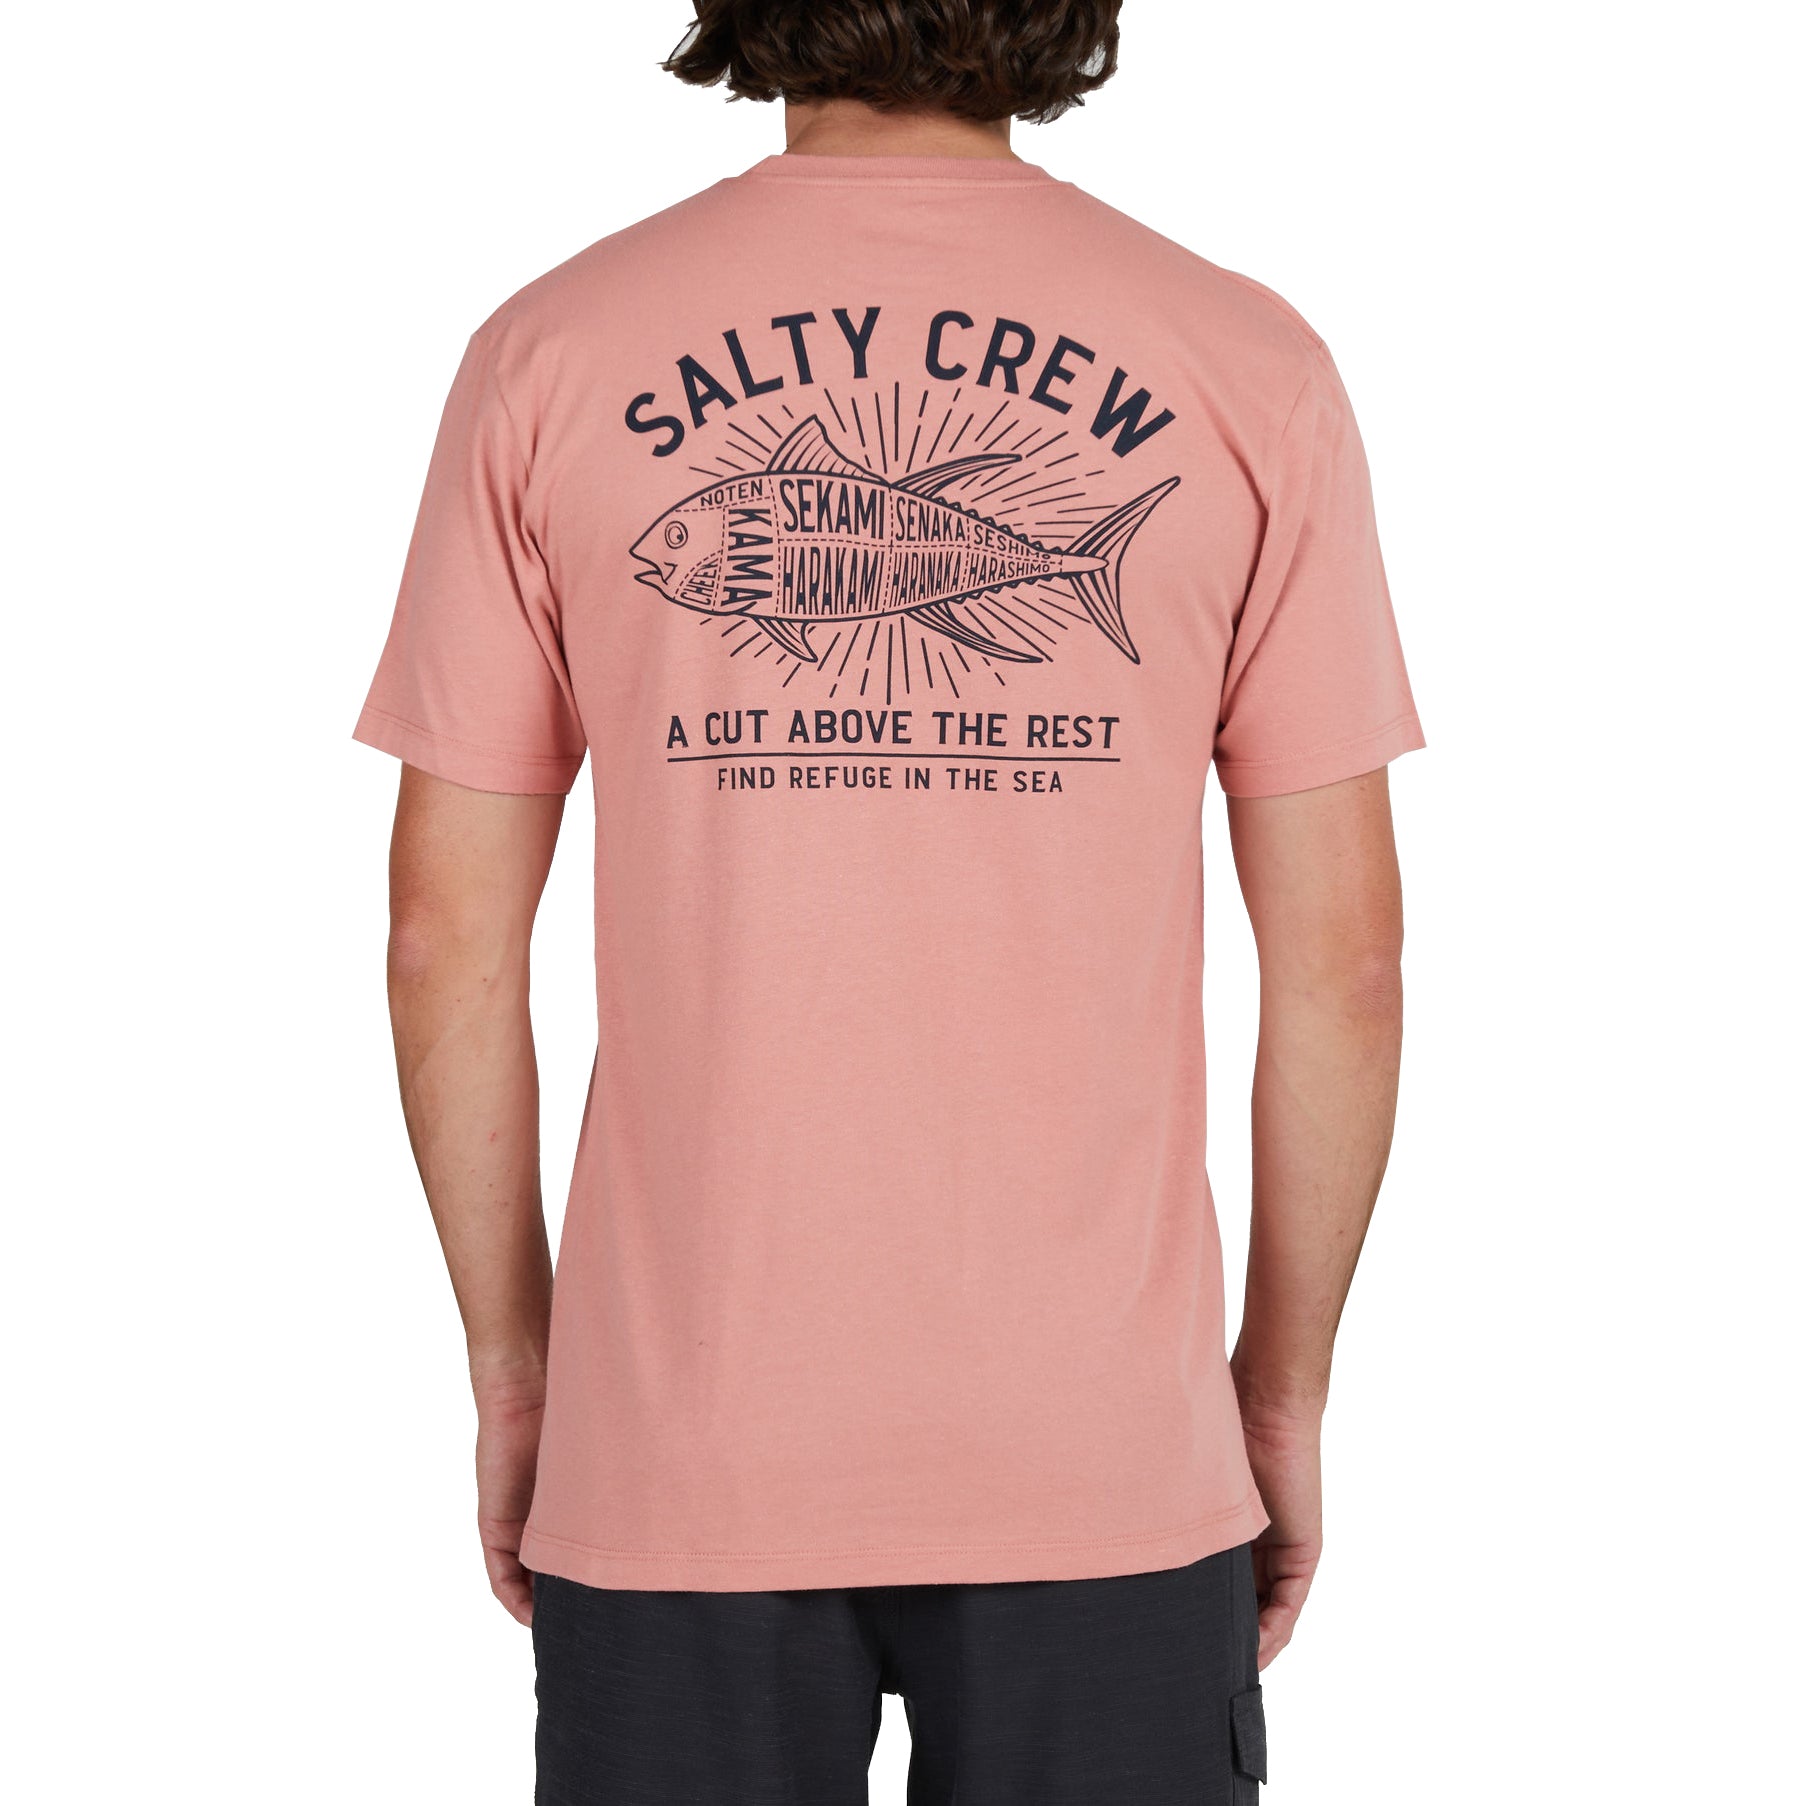 Salty Crew Cut Above SS Tee Coral XL